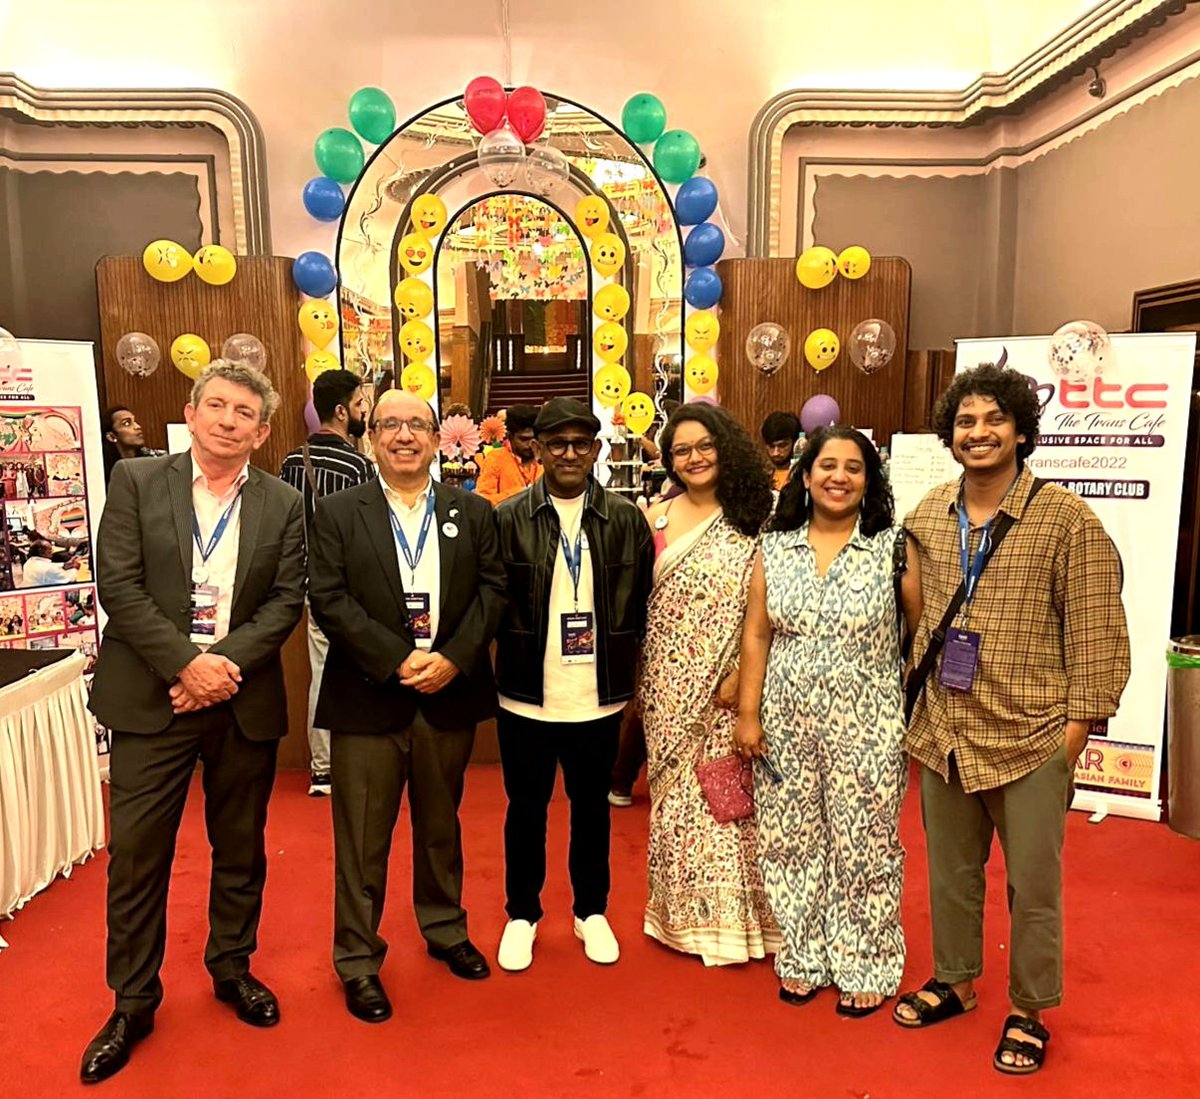 The 15th edition of KASHISH Pride Film Festival, South Asia's biggest, opened yesterday with 🇫🇷 film 'La Vénus d' Argent. 130+ films from 40 countries, panel discussions, Q&A sessions, performances.. Impressive! @ifiofficiel & @AFMumbai since it's early beginnings. #indofrench